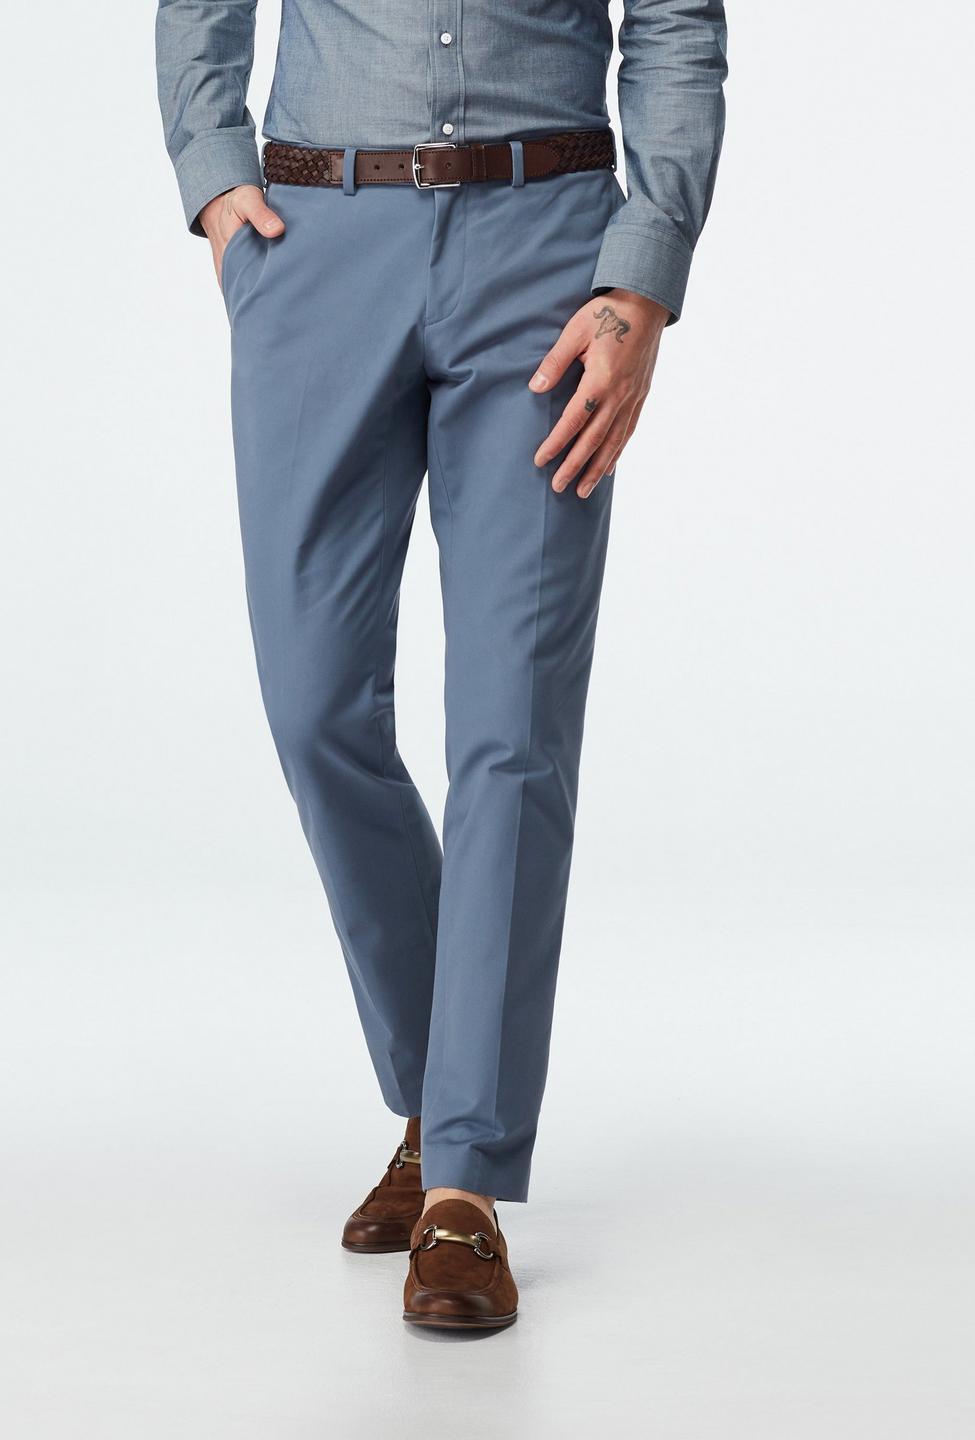 Blue pants - Houndslow Solid Design from Premium Indochino Collection